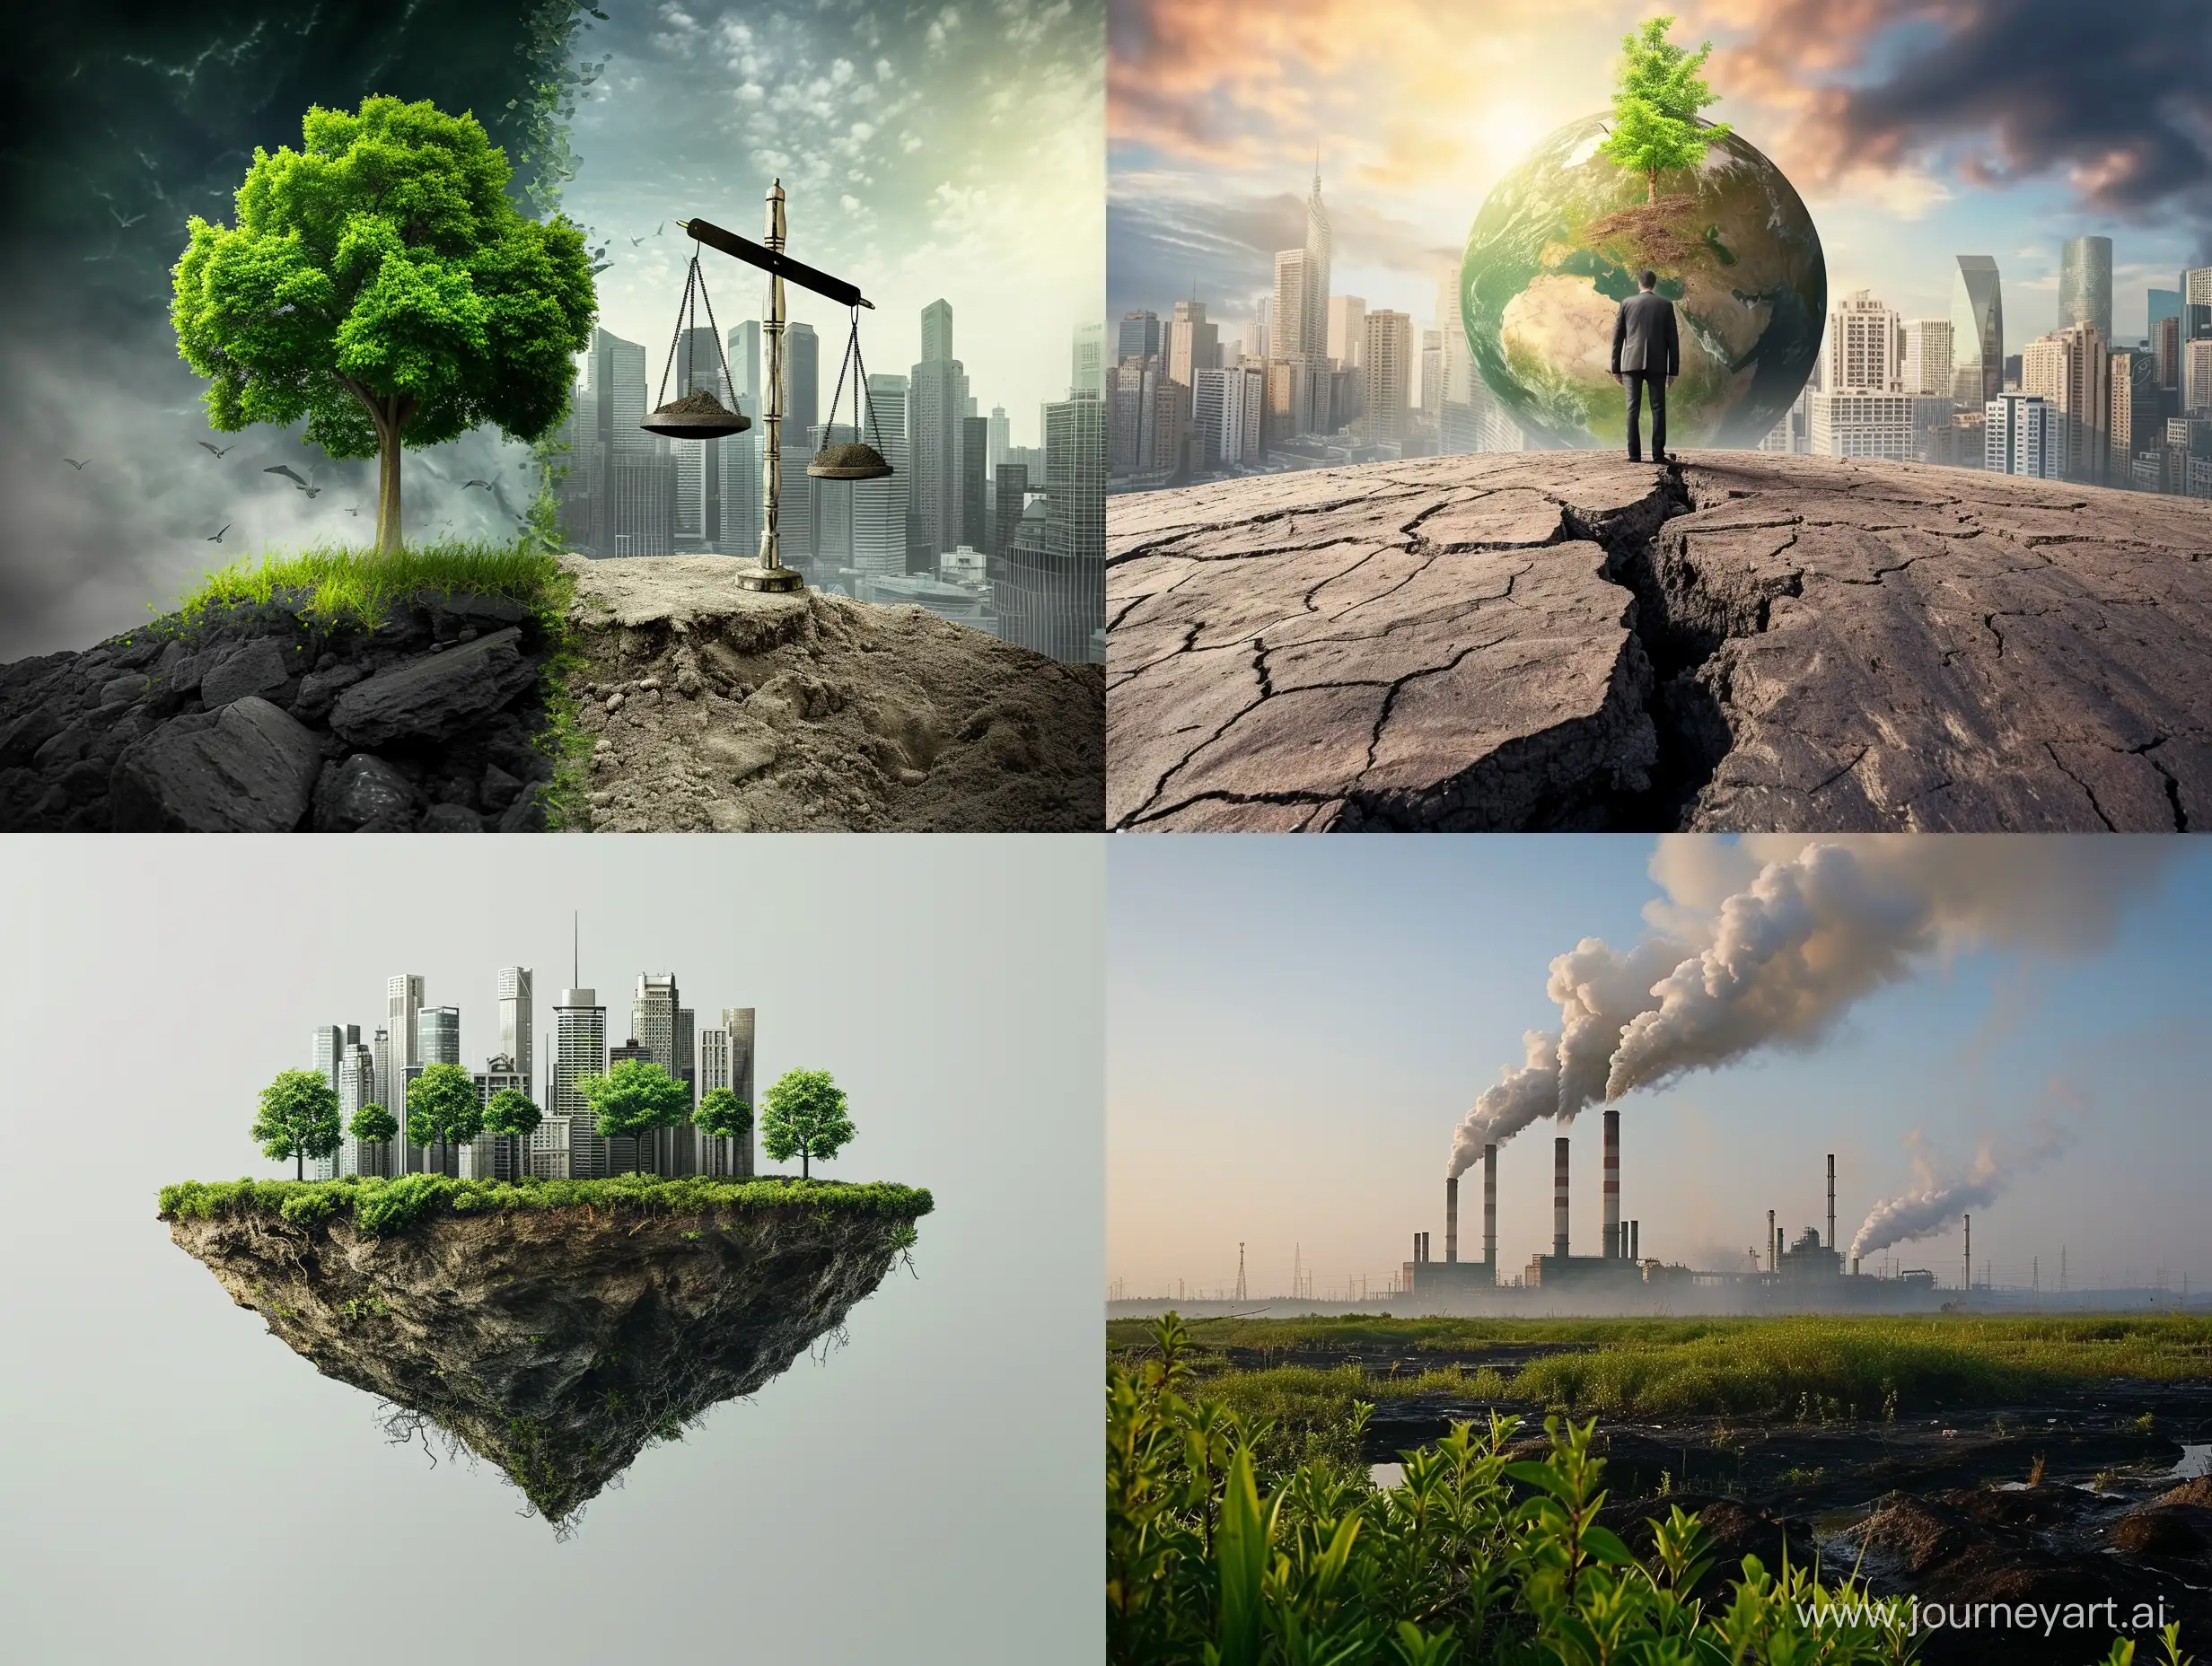 Social-Injustice-and-Environmental-Degradation-Consequences-of-Unbridled-Growth